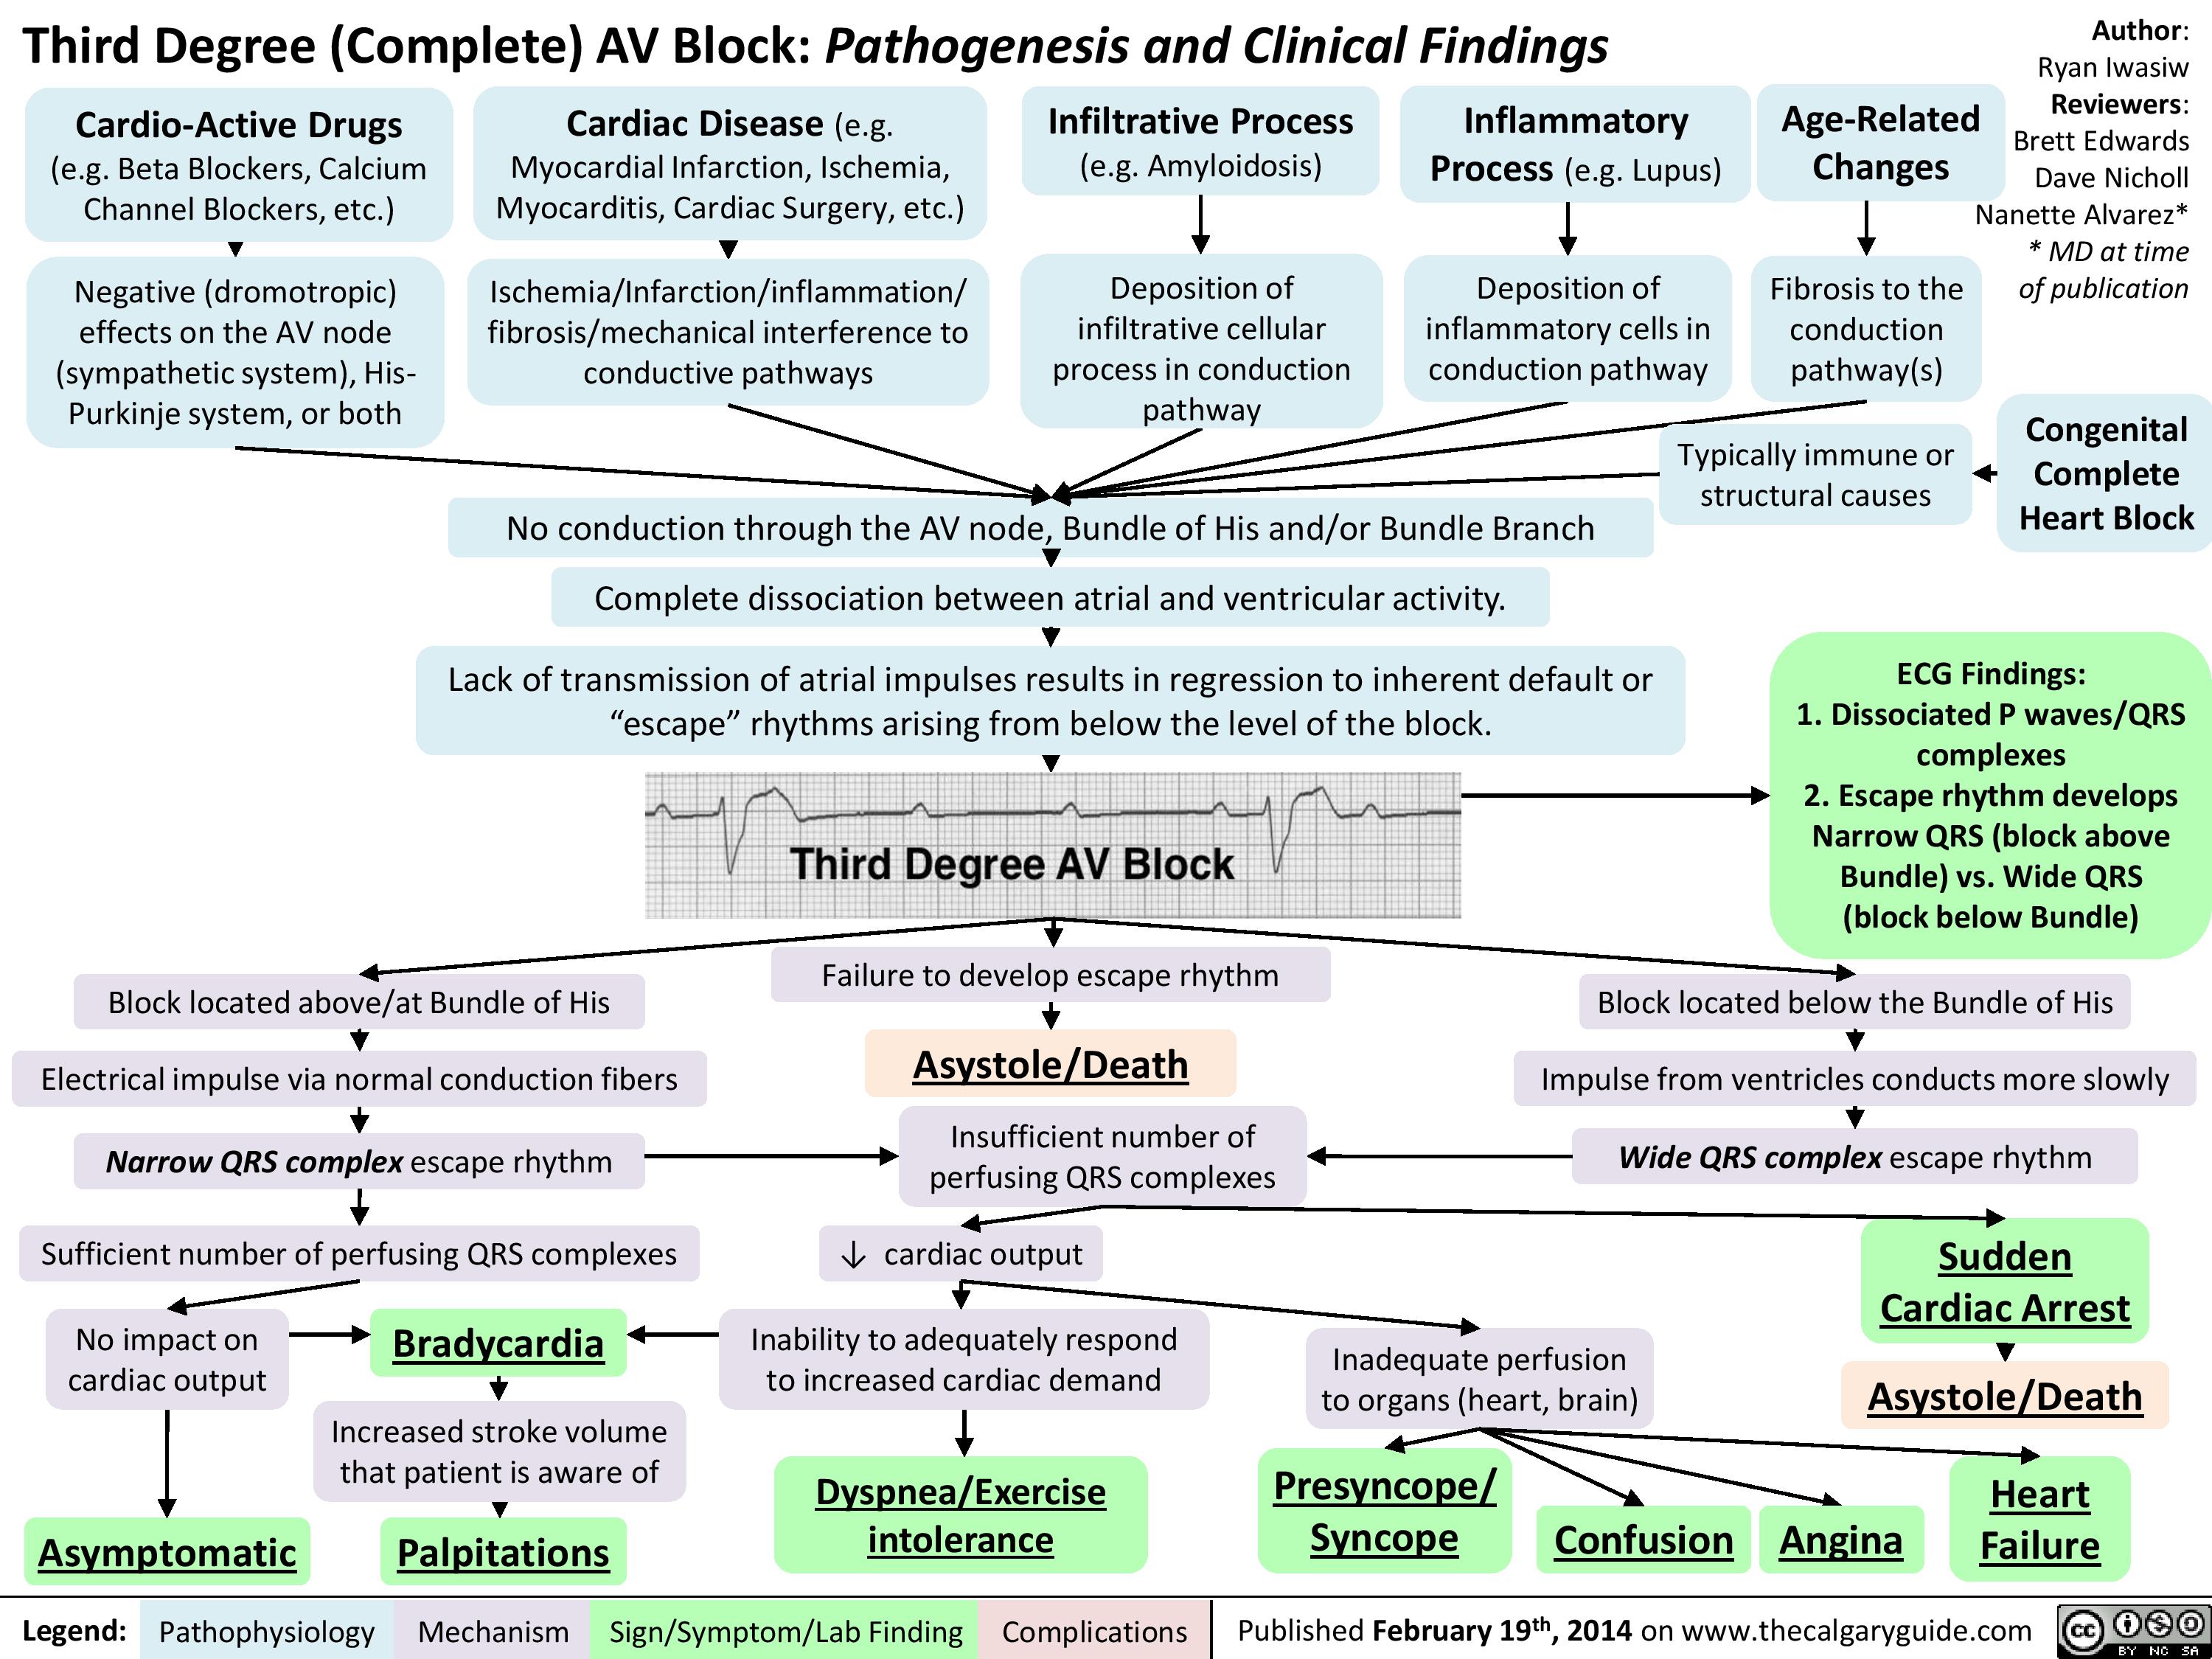 Third Degree (Complete) AV Block - Pathogenesis and      Clinical Findings